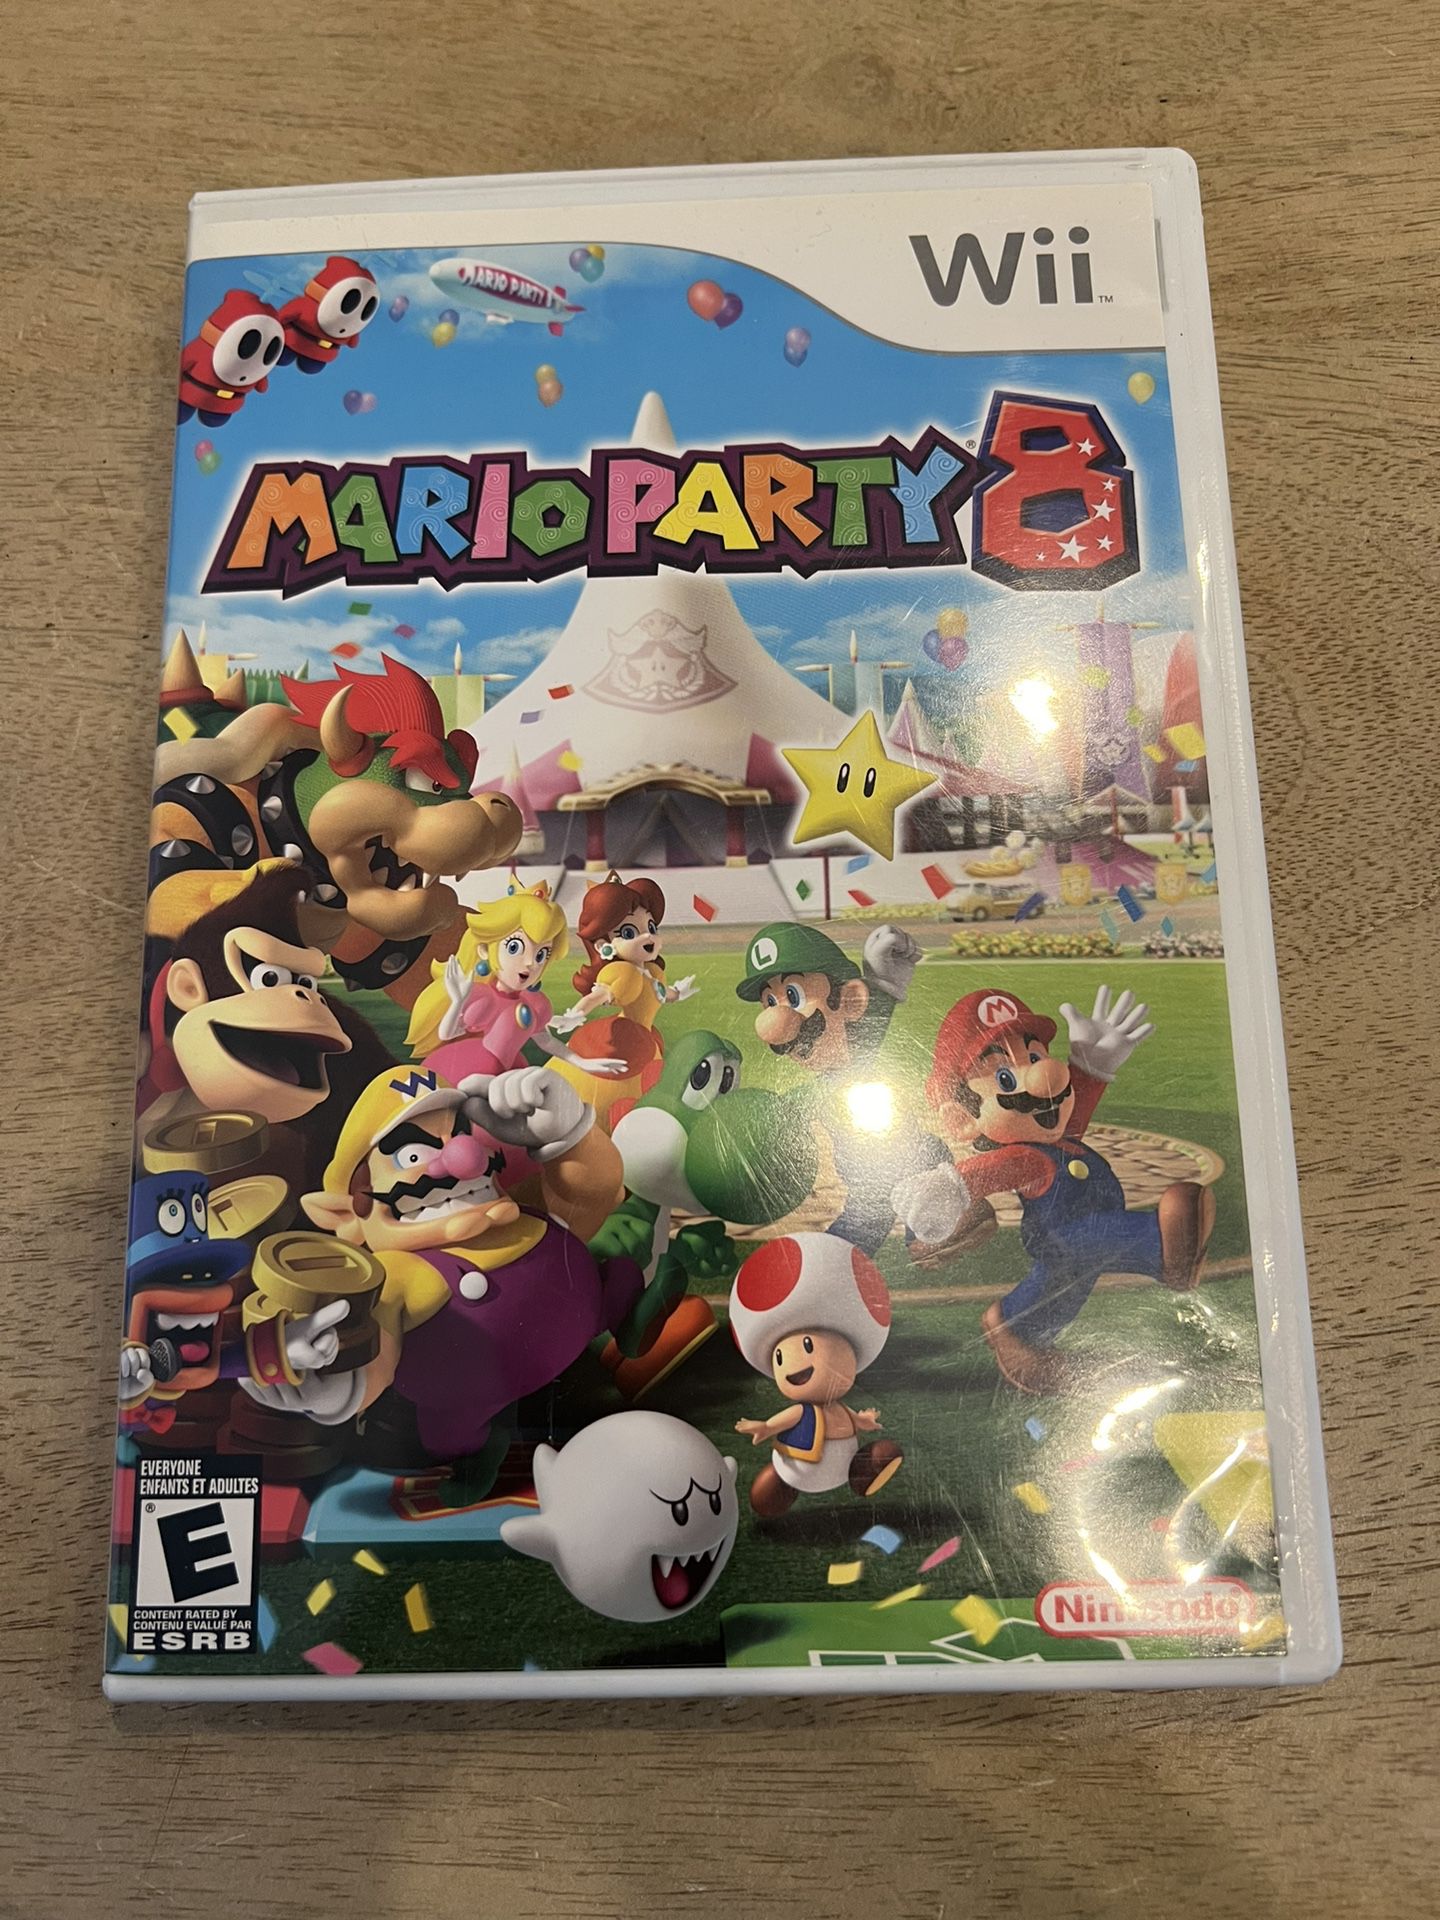 Wii Sports & Mario Party 8